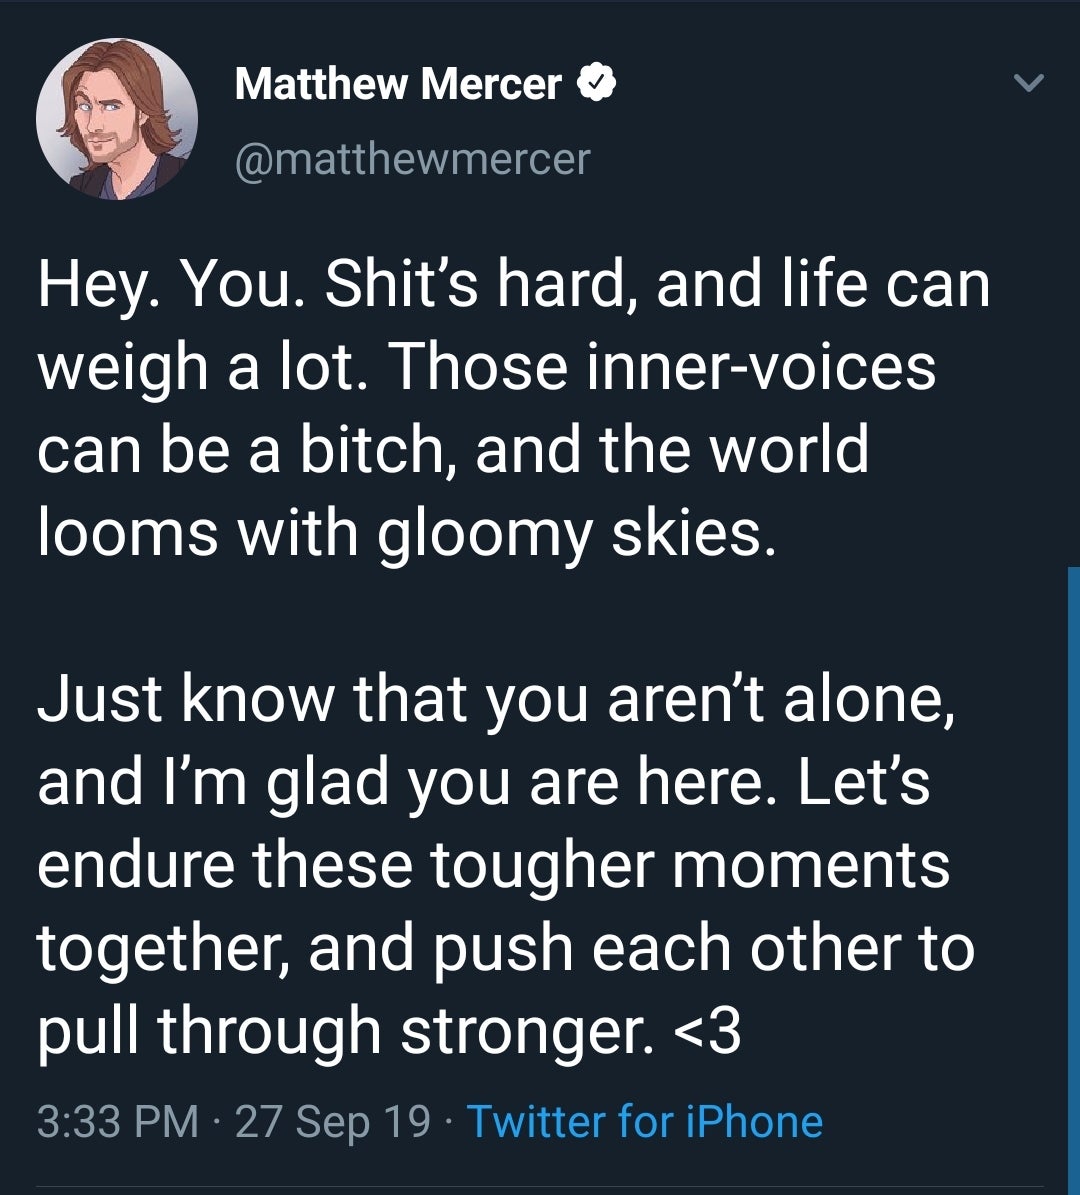 wholesome meme - Matthew Mercer Hey. You. Shit's hard, and life can weigh a lot. Those innervoices can be a bitch, and the world looms with gloomy skies. Just know that you aren't alone, and I'm glad you are here. Let's endure these tougher moments togeth